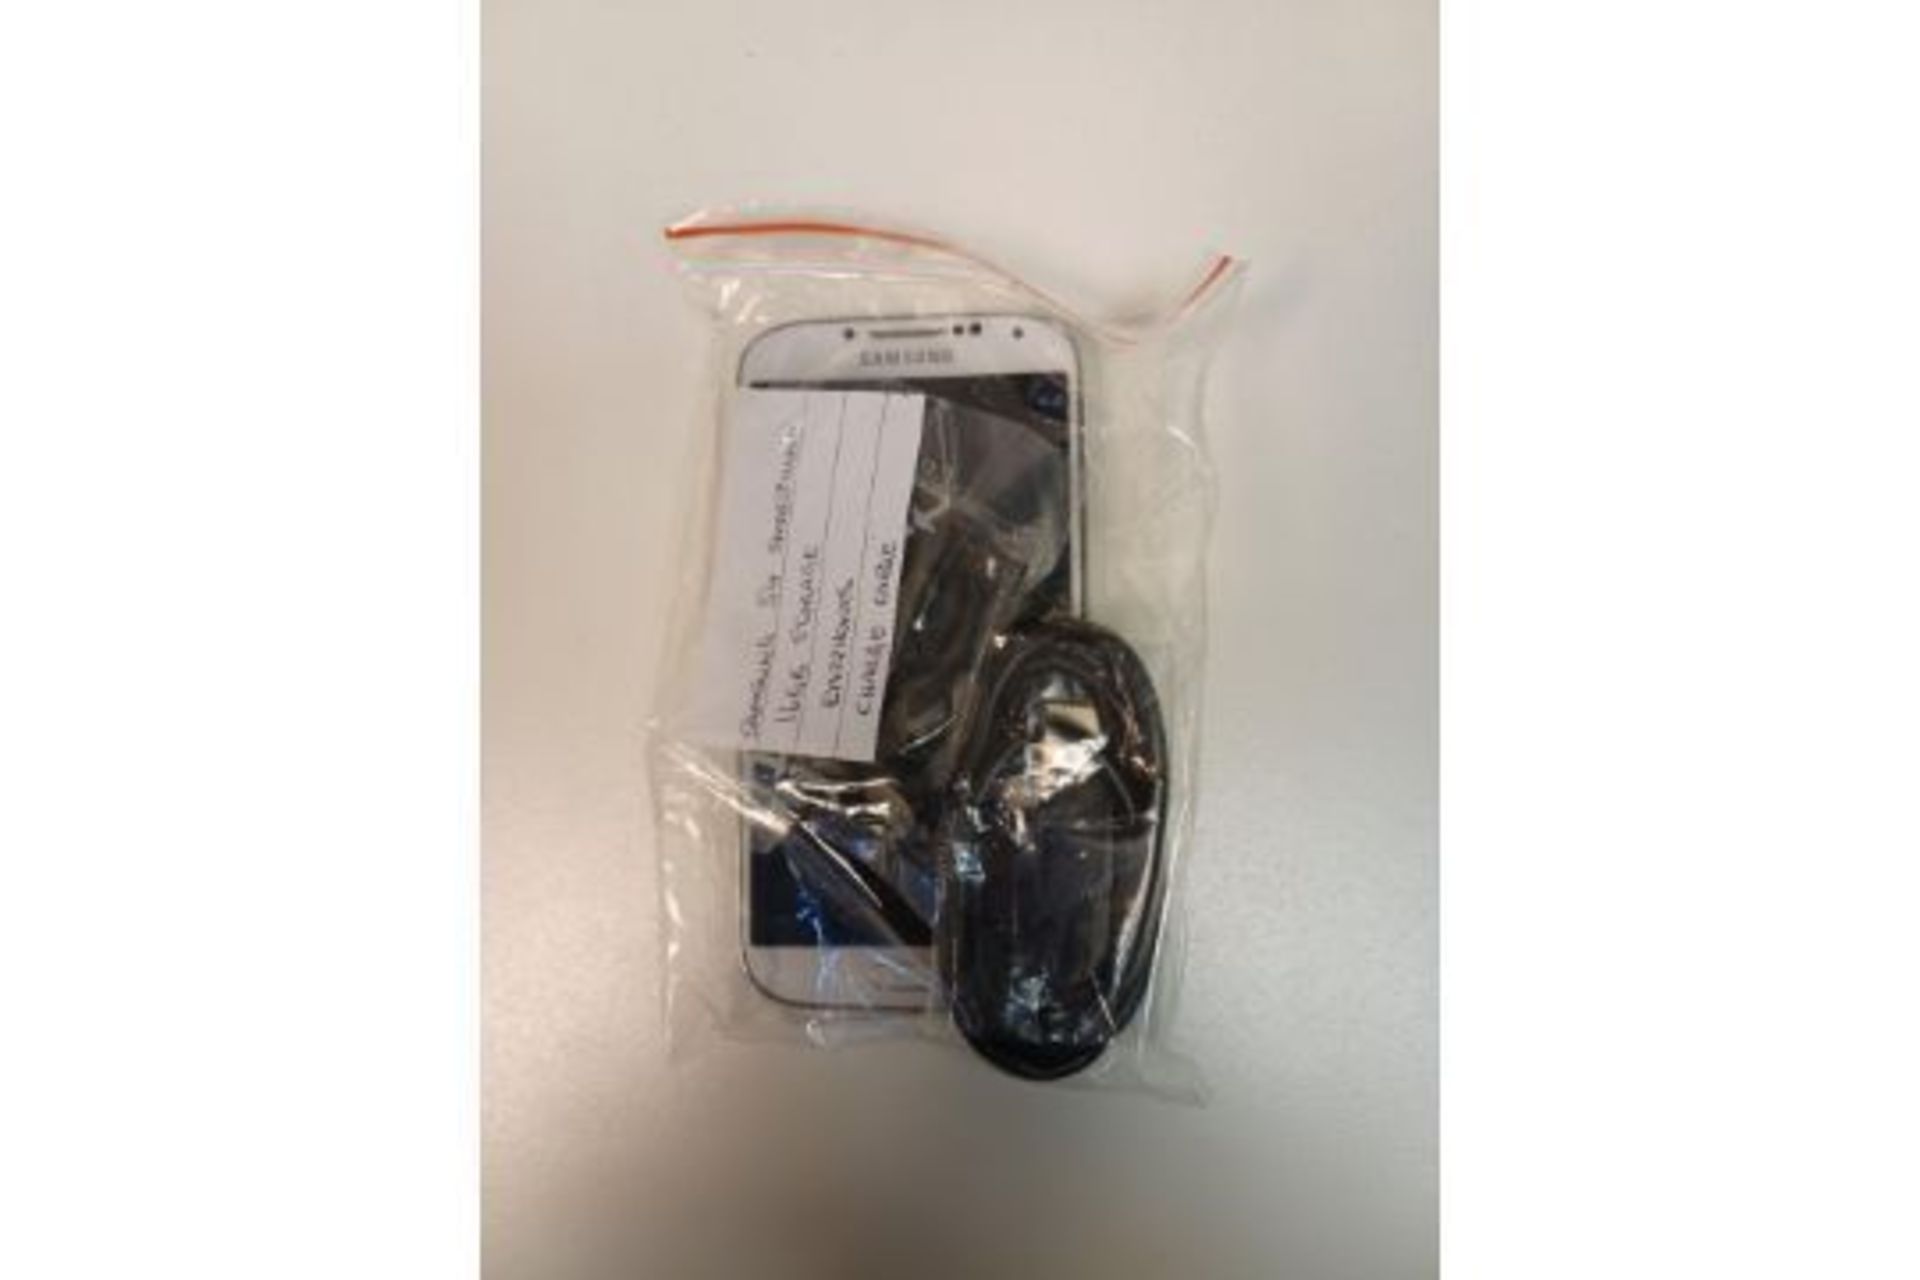 SAMSUNG S4 SMARTPHONE 16GB STORAGE EARPHONE AND CHARGE CABLE (76)